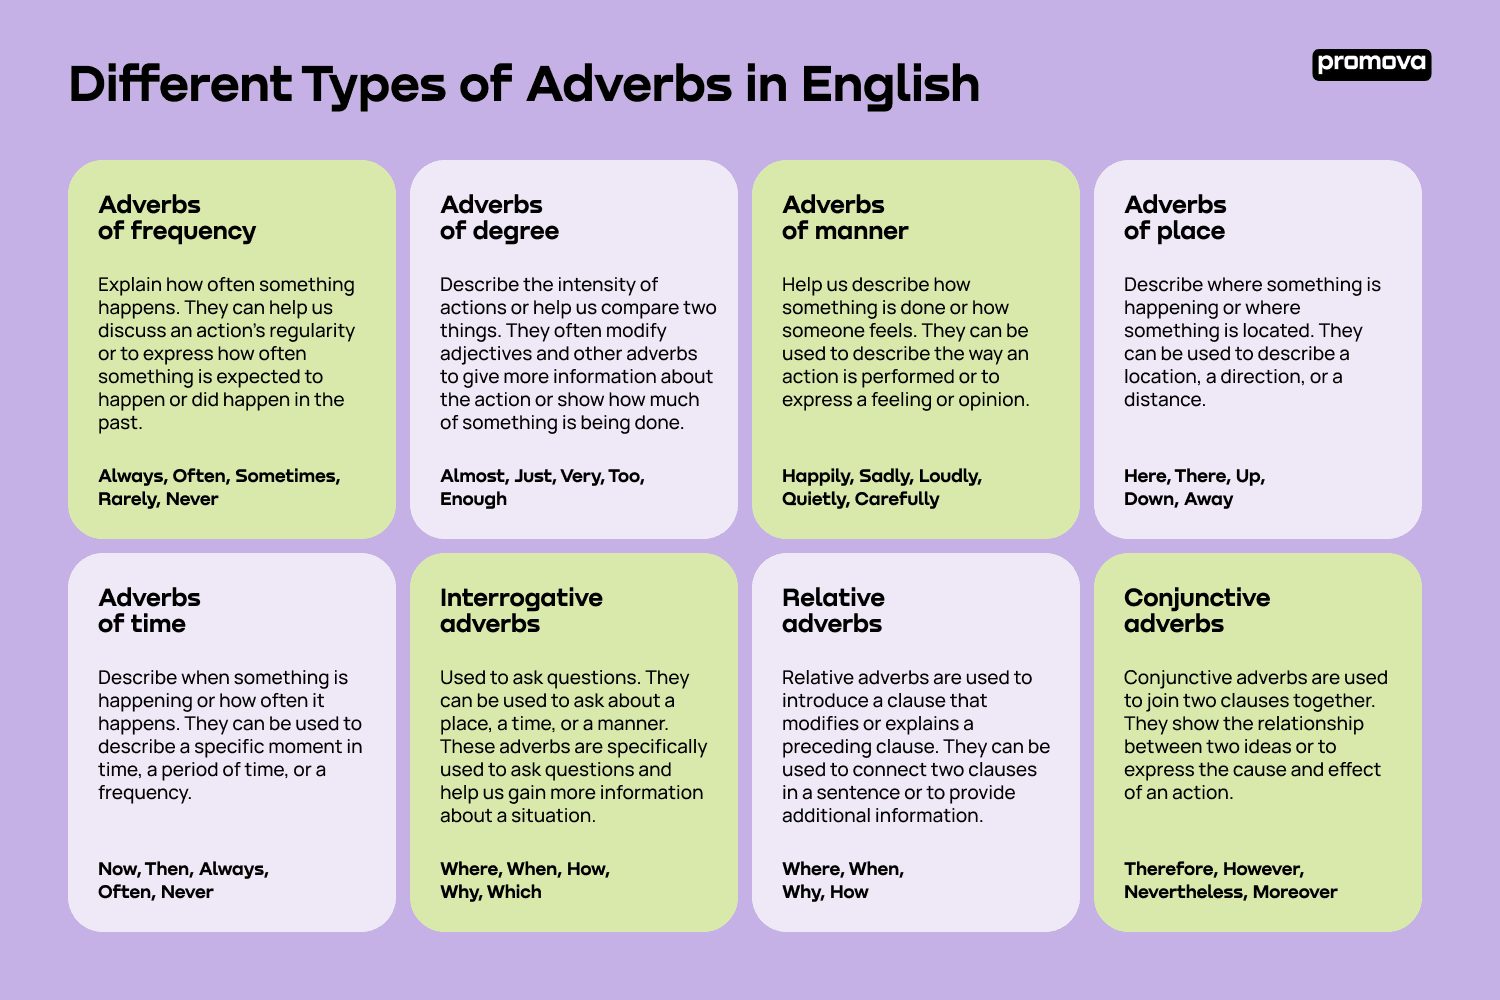 Different Types of Adverbs in English